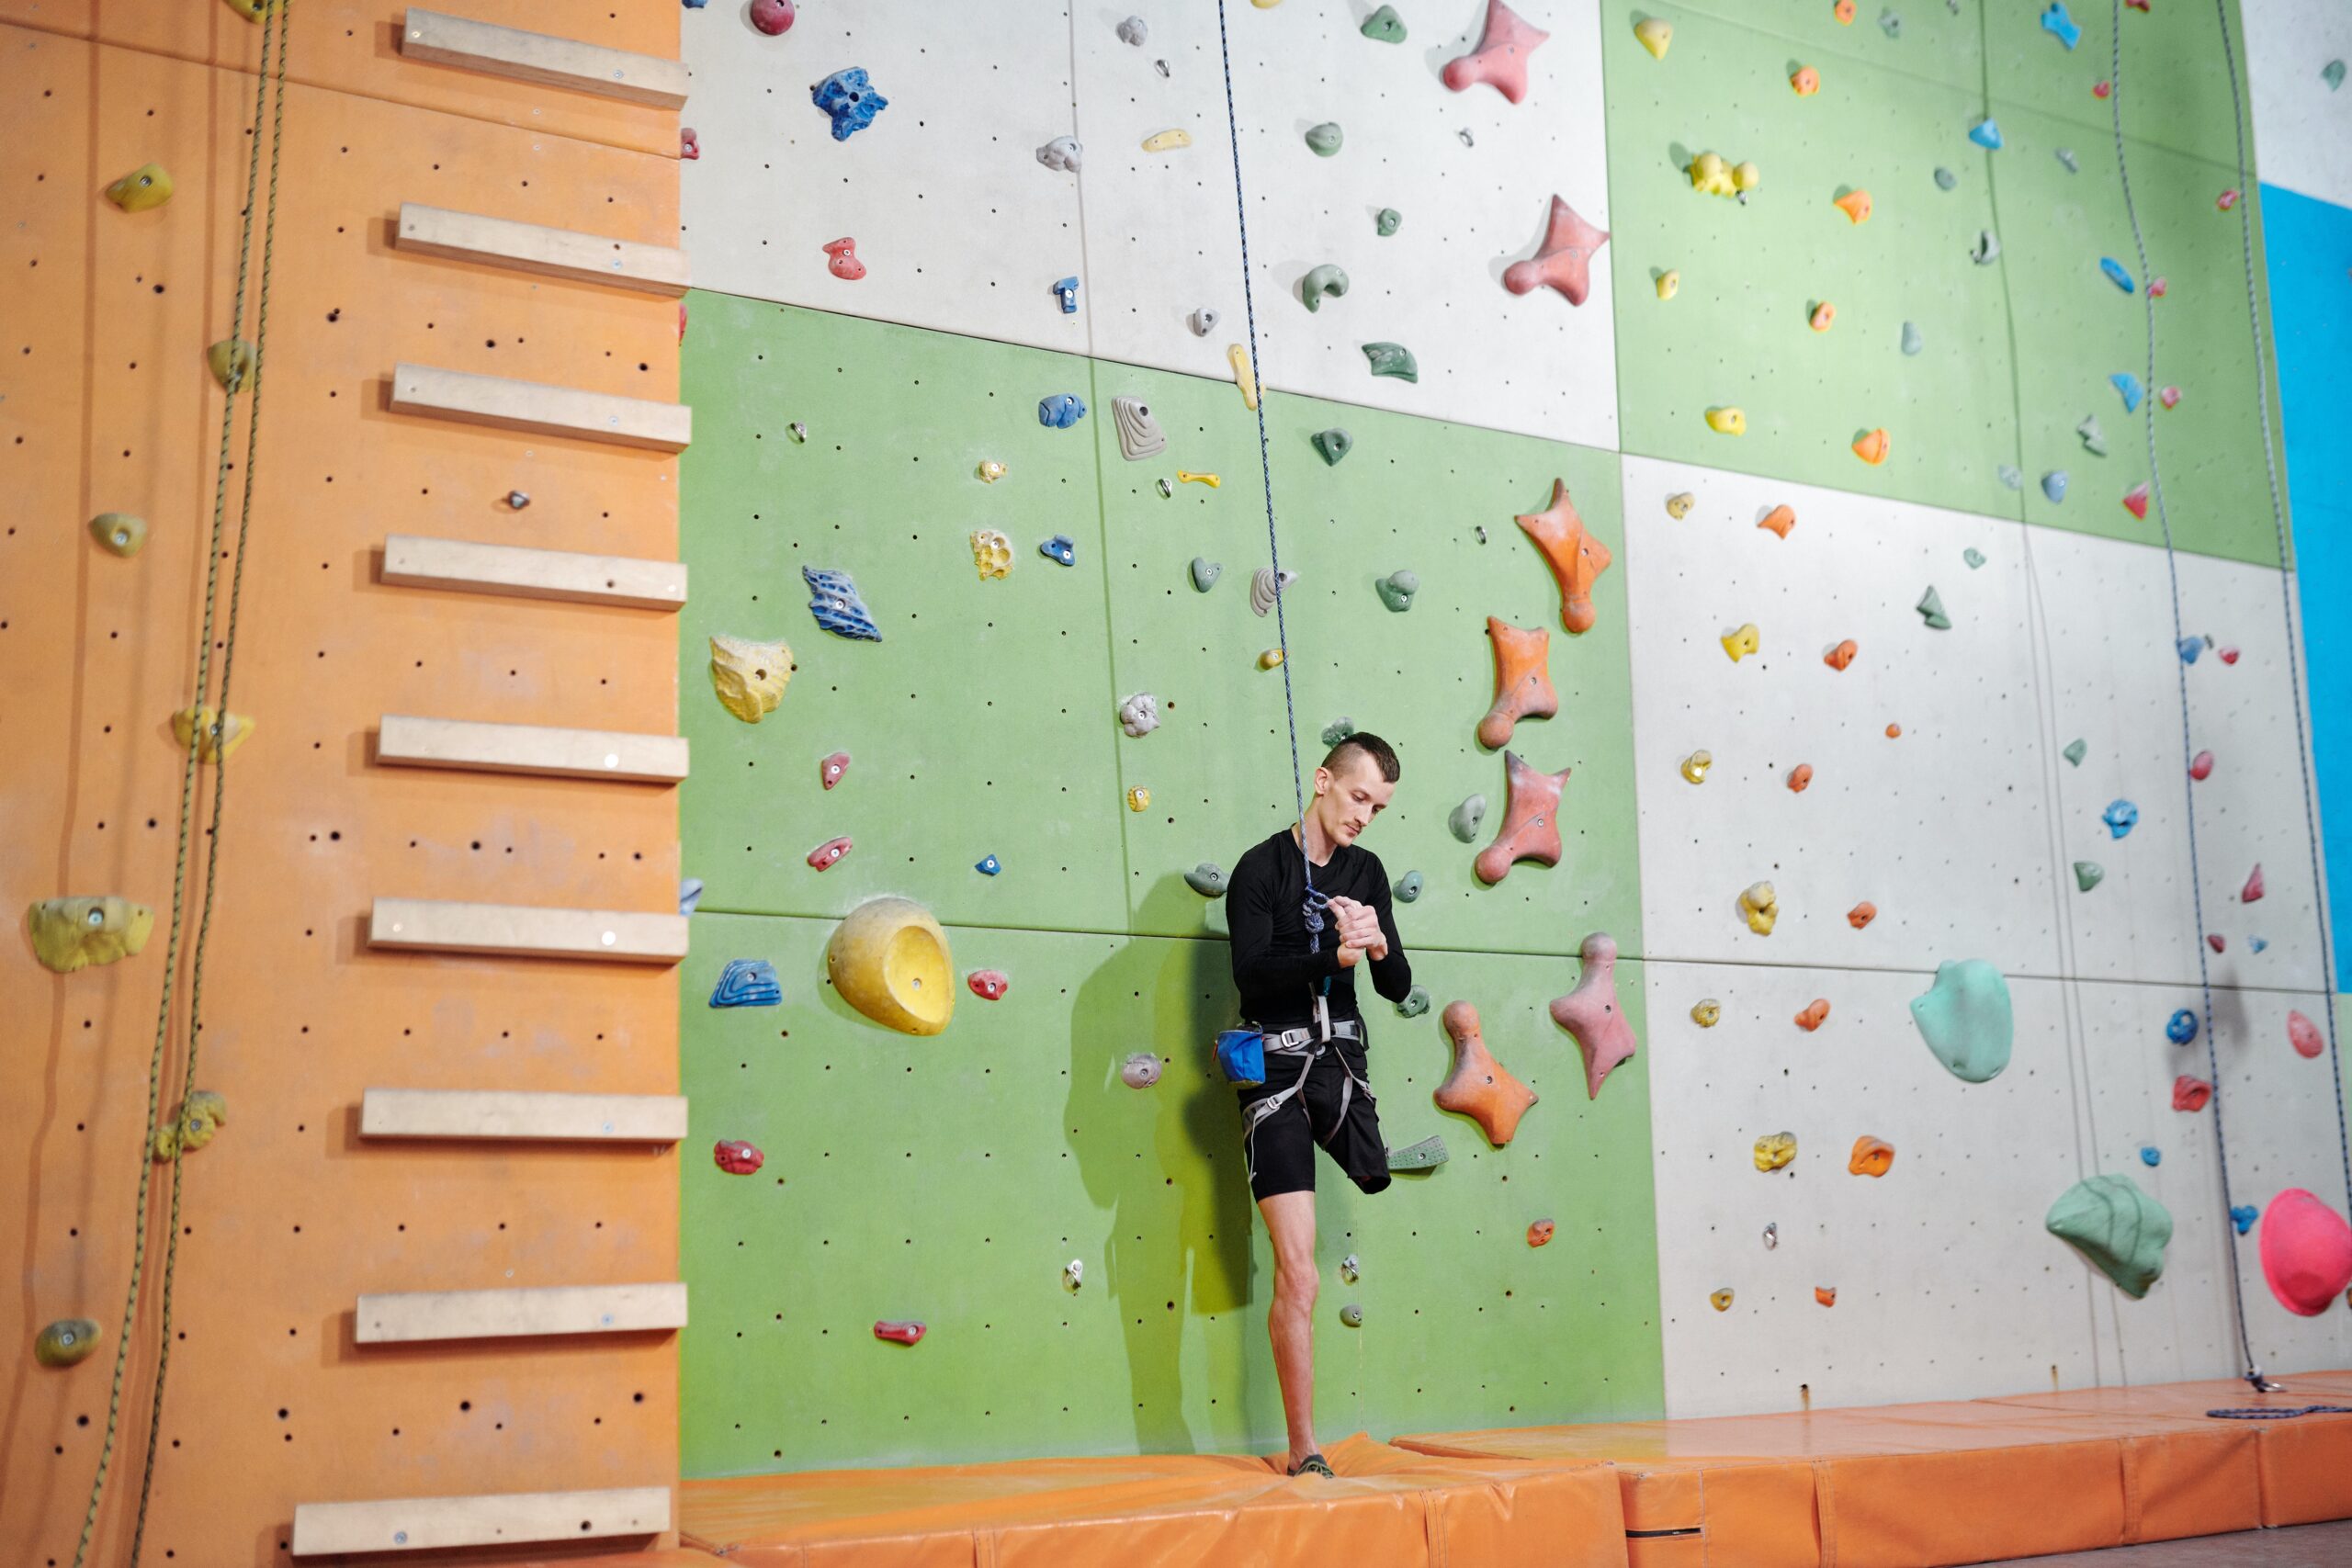 A climber with a lower limb amputation stands at the bottom of a colourful climbing wall.